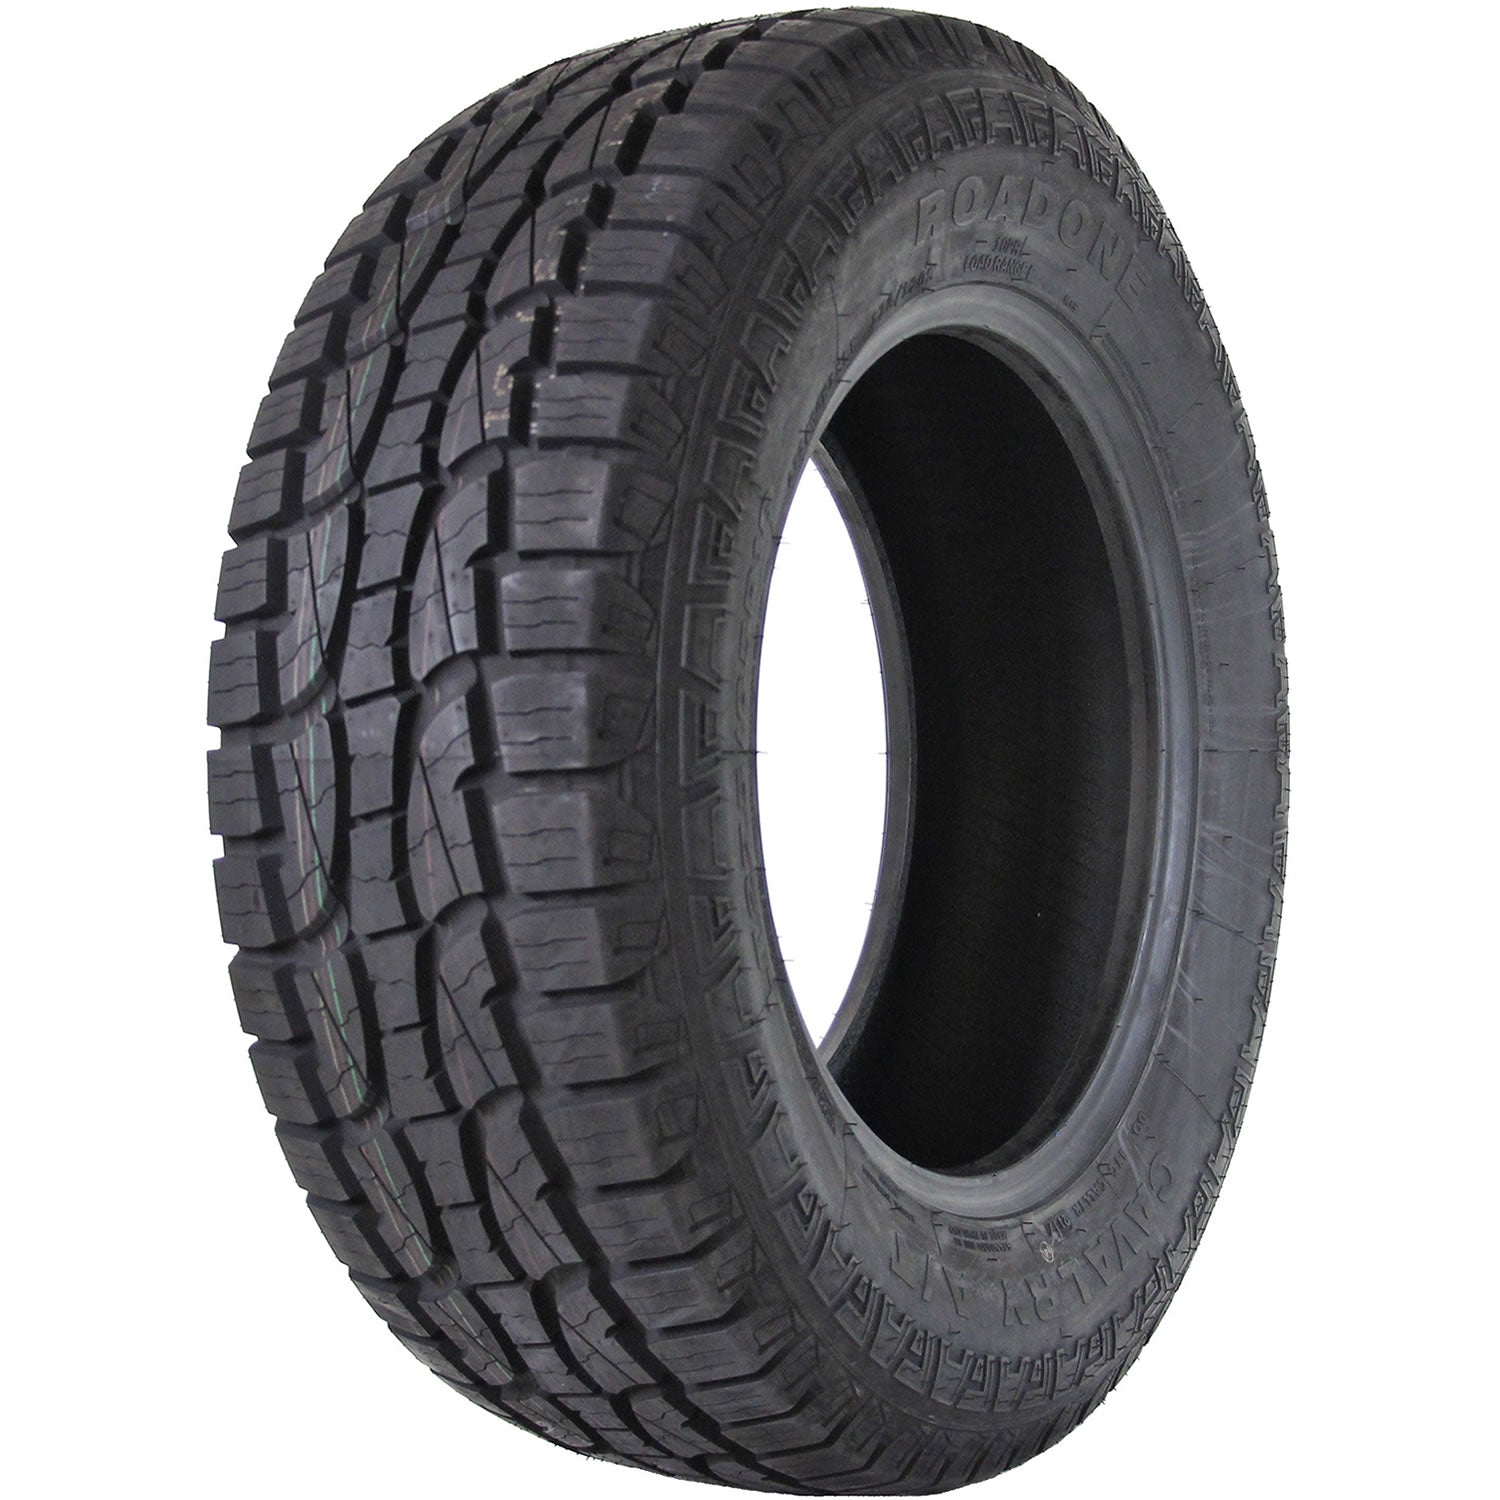 ROAD ONE CAVALRY A/T LT285/75R16 (32.8X11.3R 16) Tires